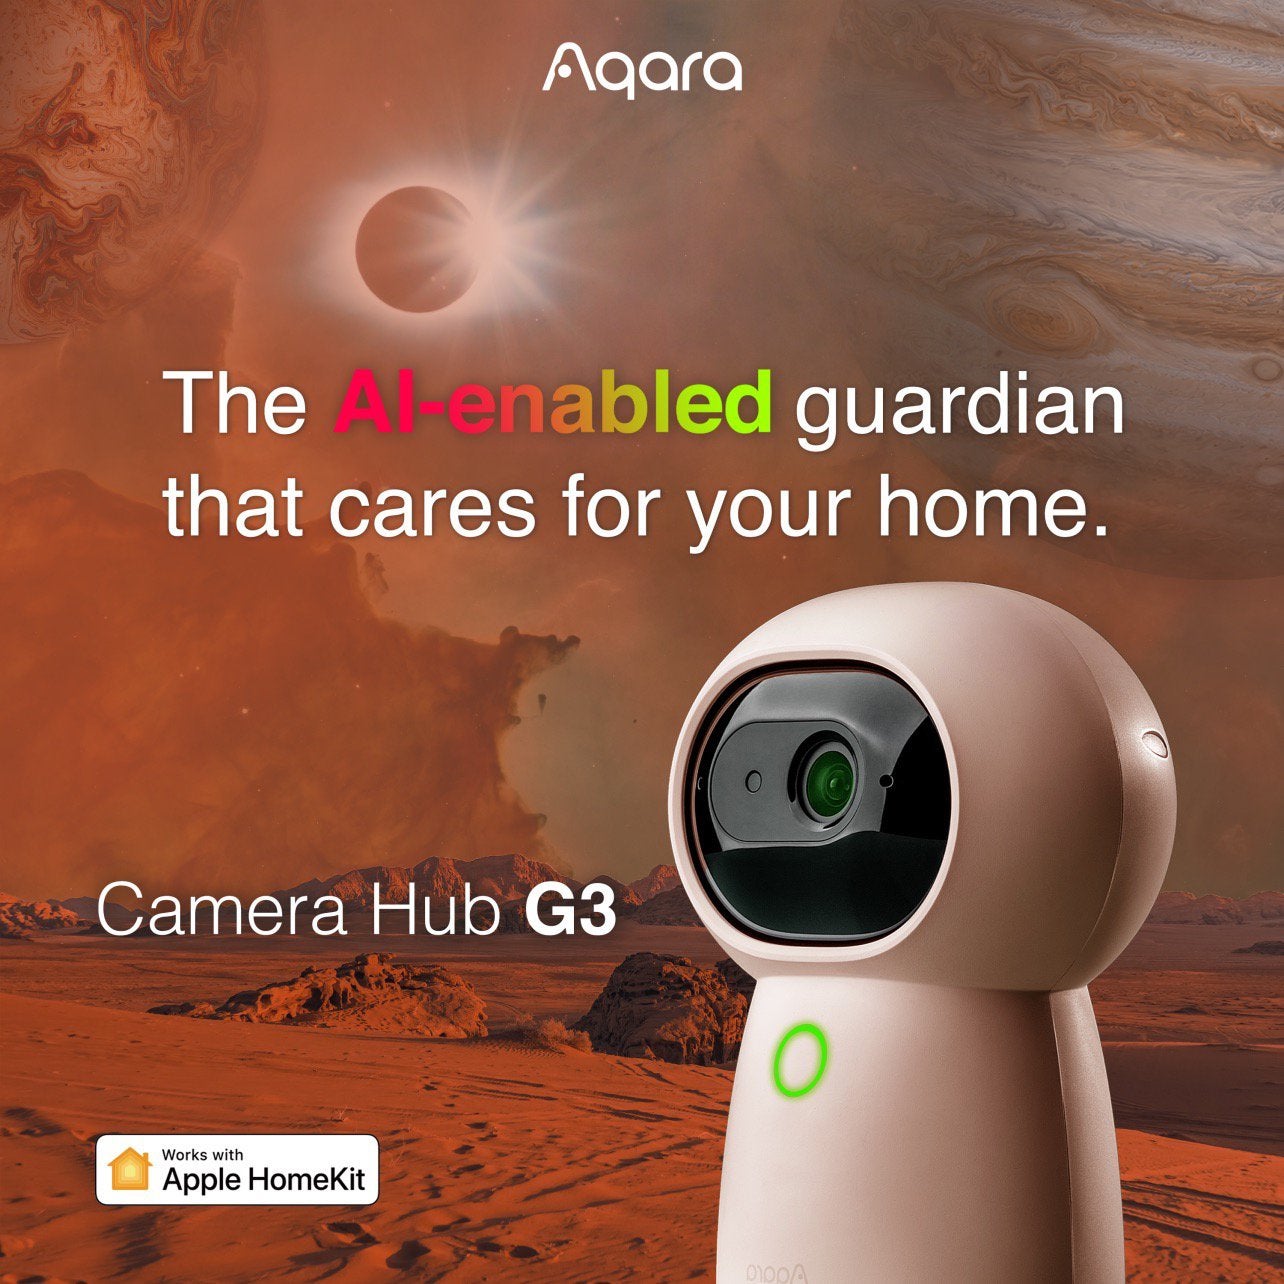 The Aqara G3 is available in the US Canada and